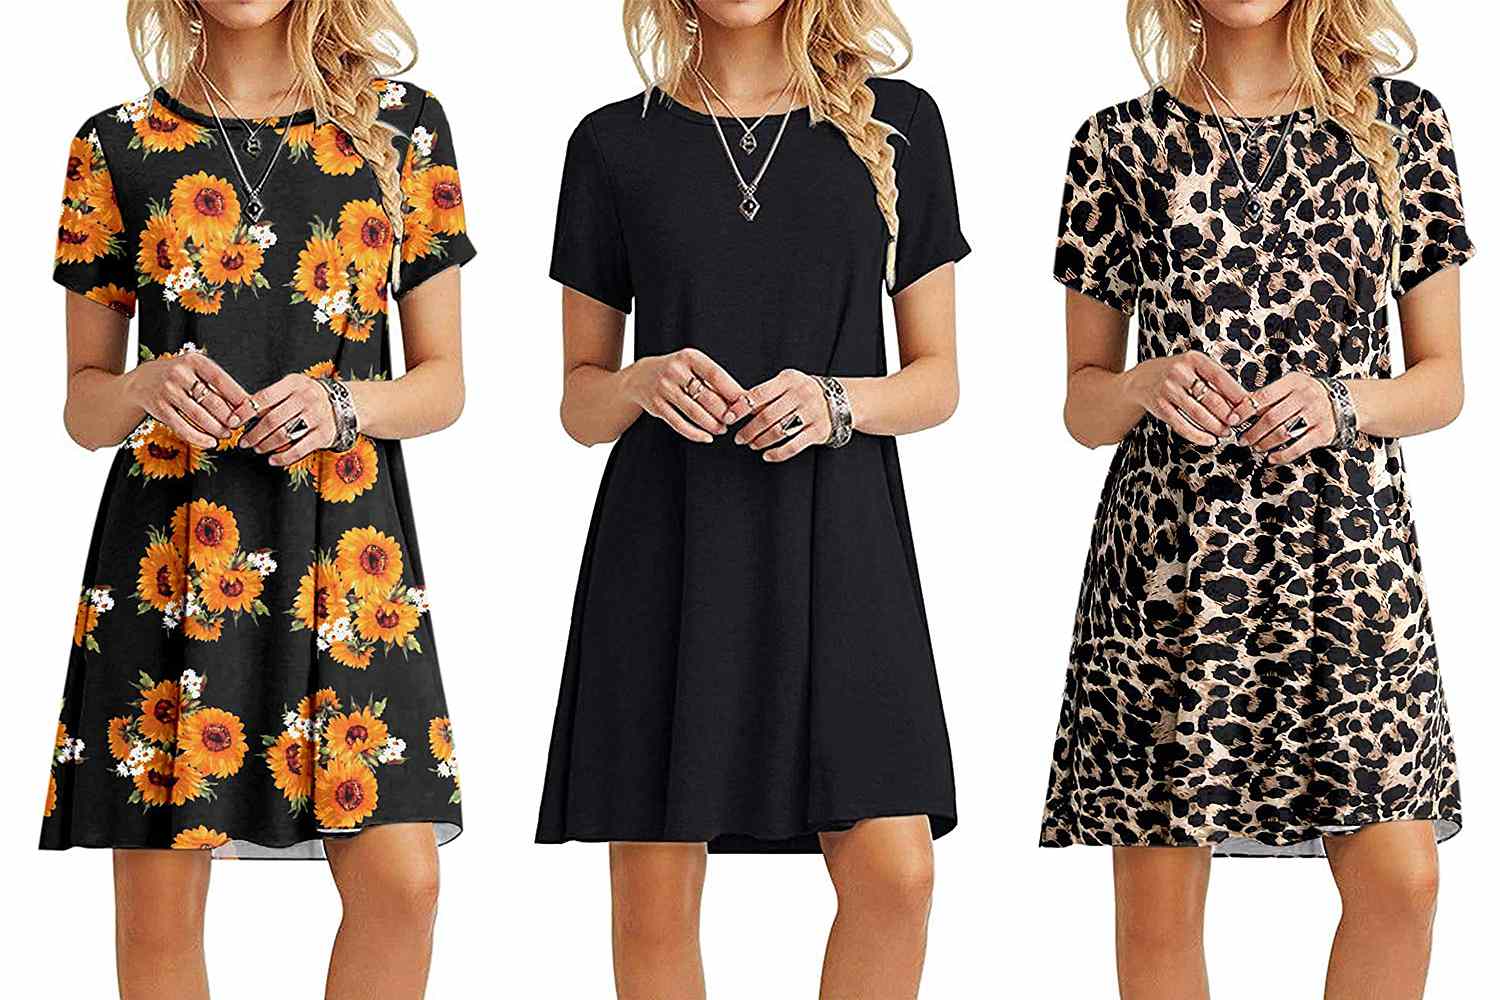 This Amazon T-Shirt Dress Is the New Summer Uniform | PEOPLE.com